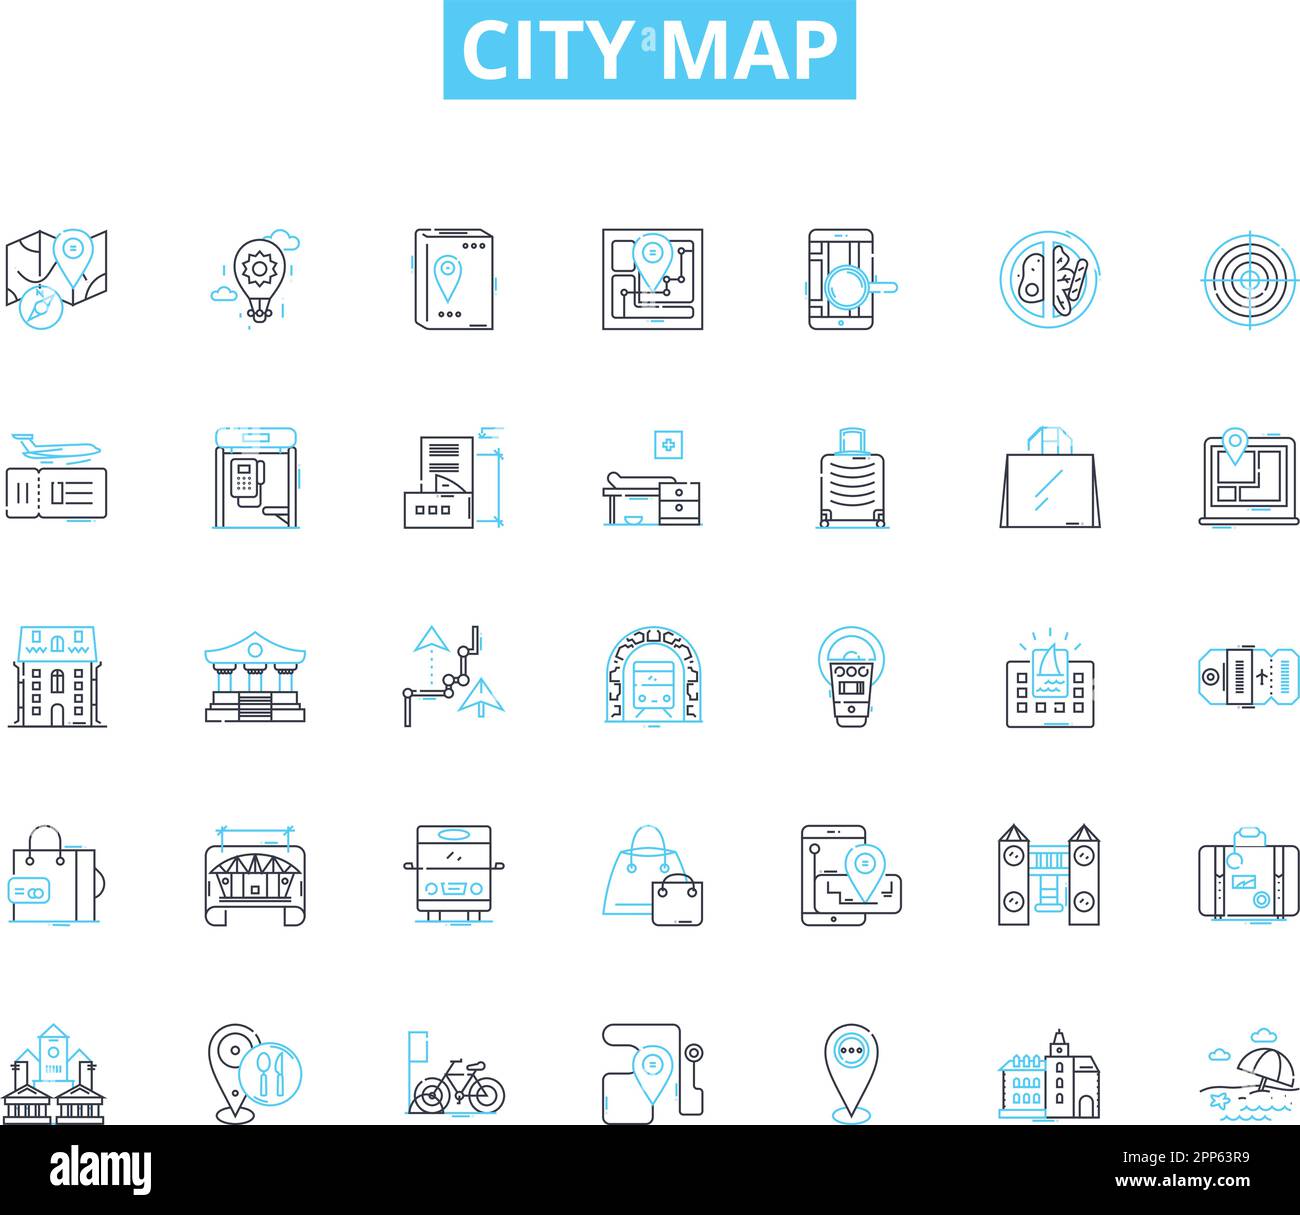 City map linear icons set. Navigation, Tourist, Streets, Districts, Landmarks, Transit, Tour line vector and concept signs. Guide,Directions Stock Vector